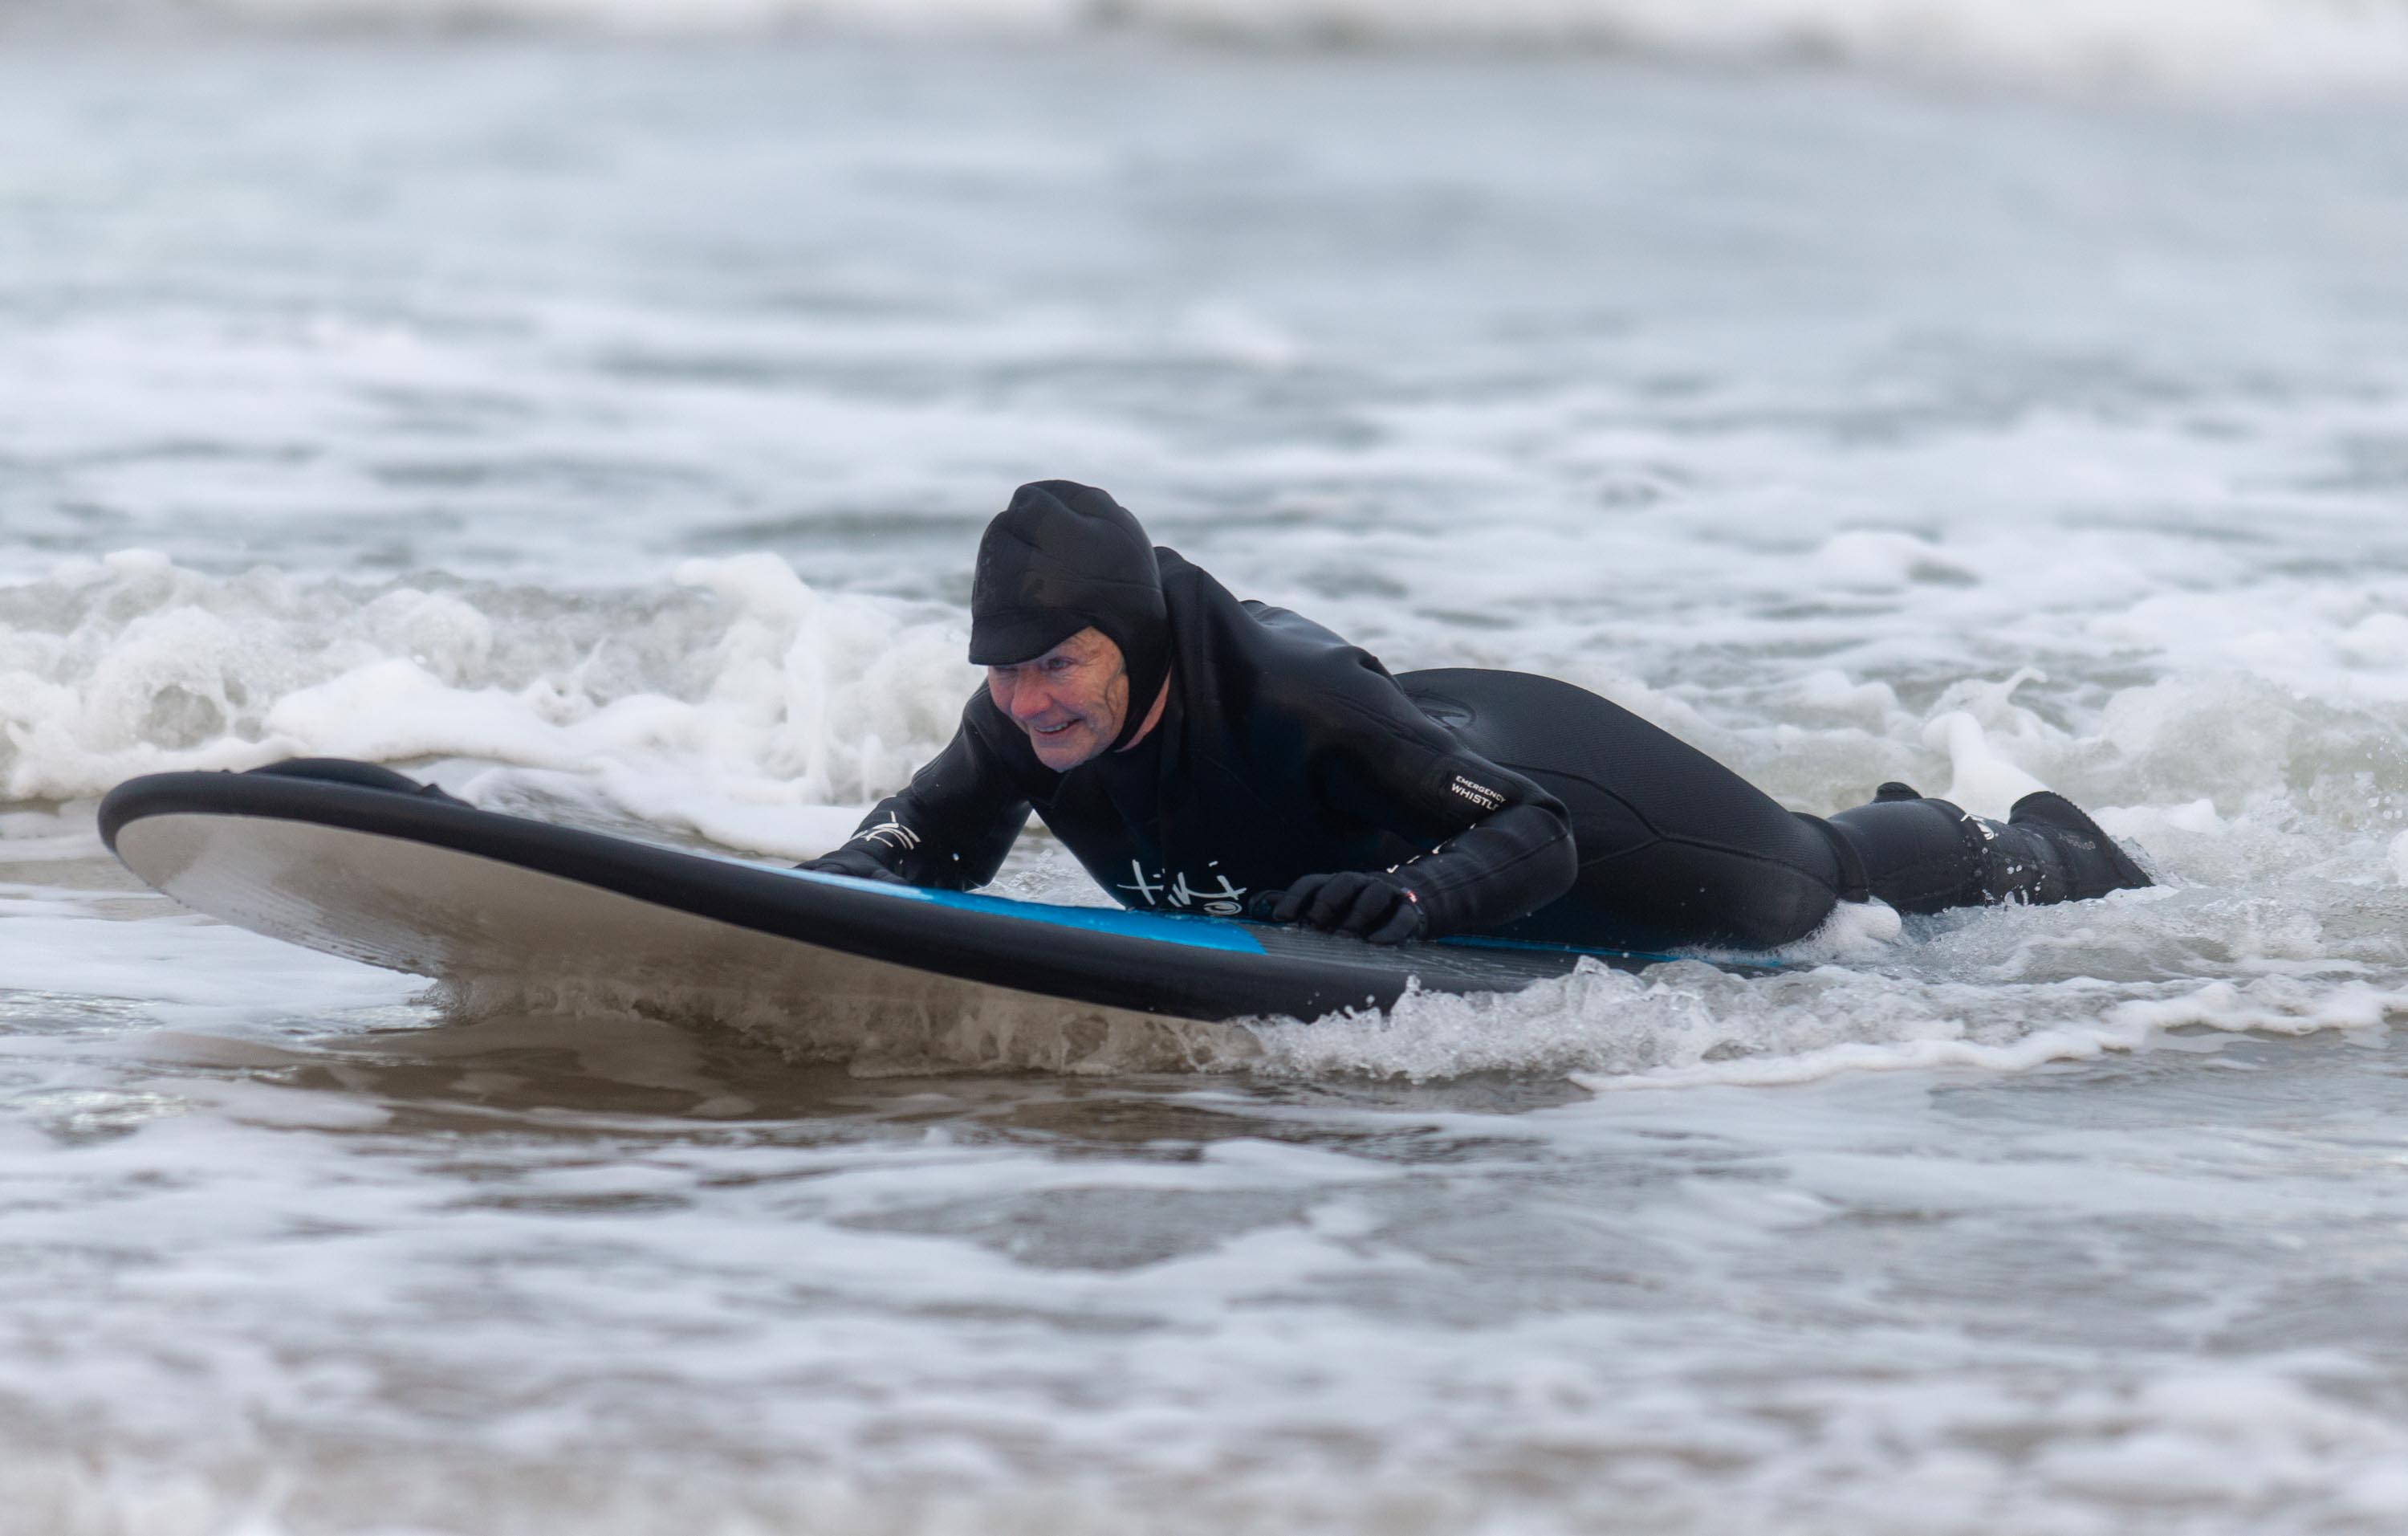 Anne-Marie Walker tried surfing for the first time at the age of 72 at Lossiemouth beach